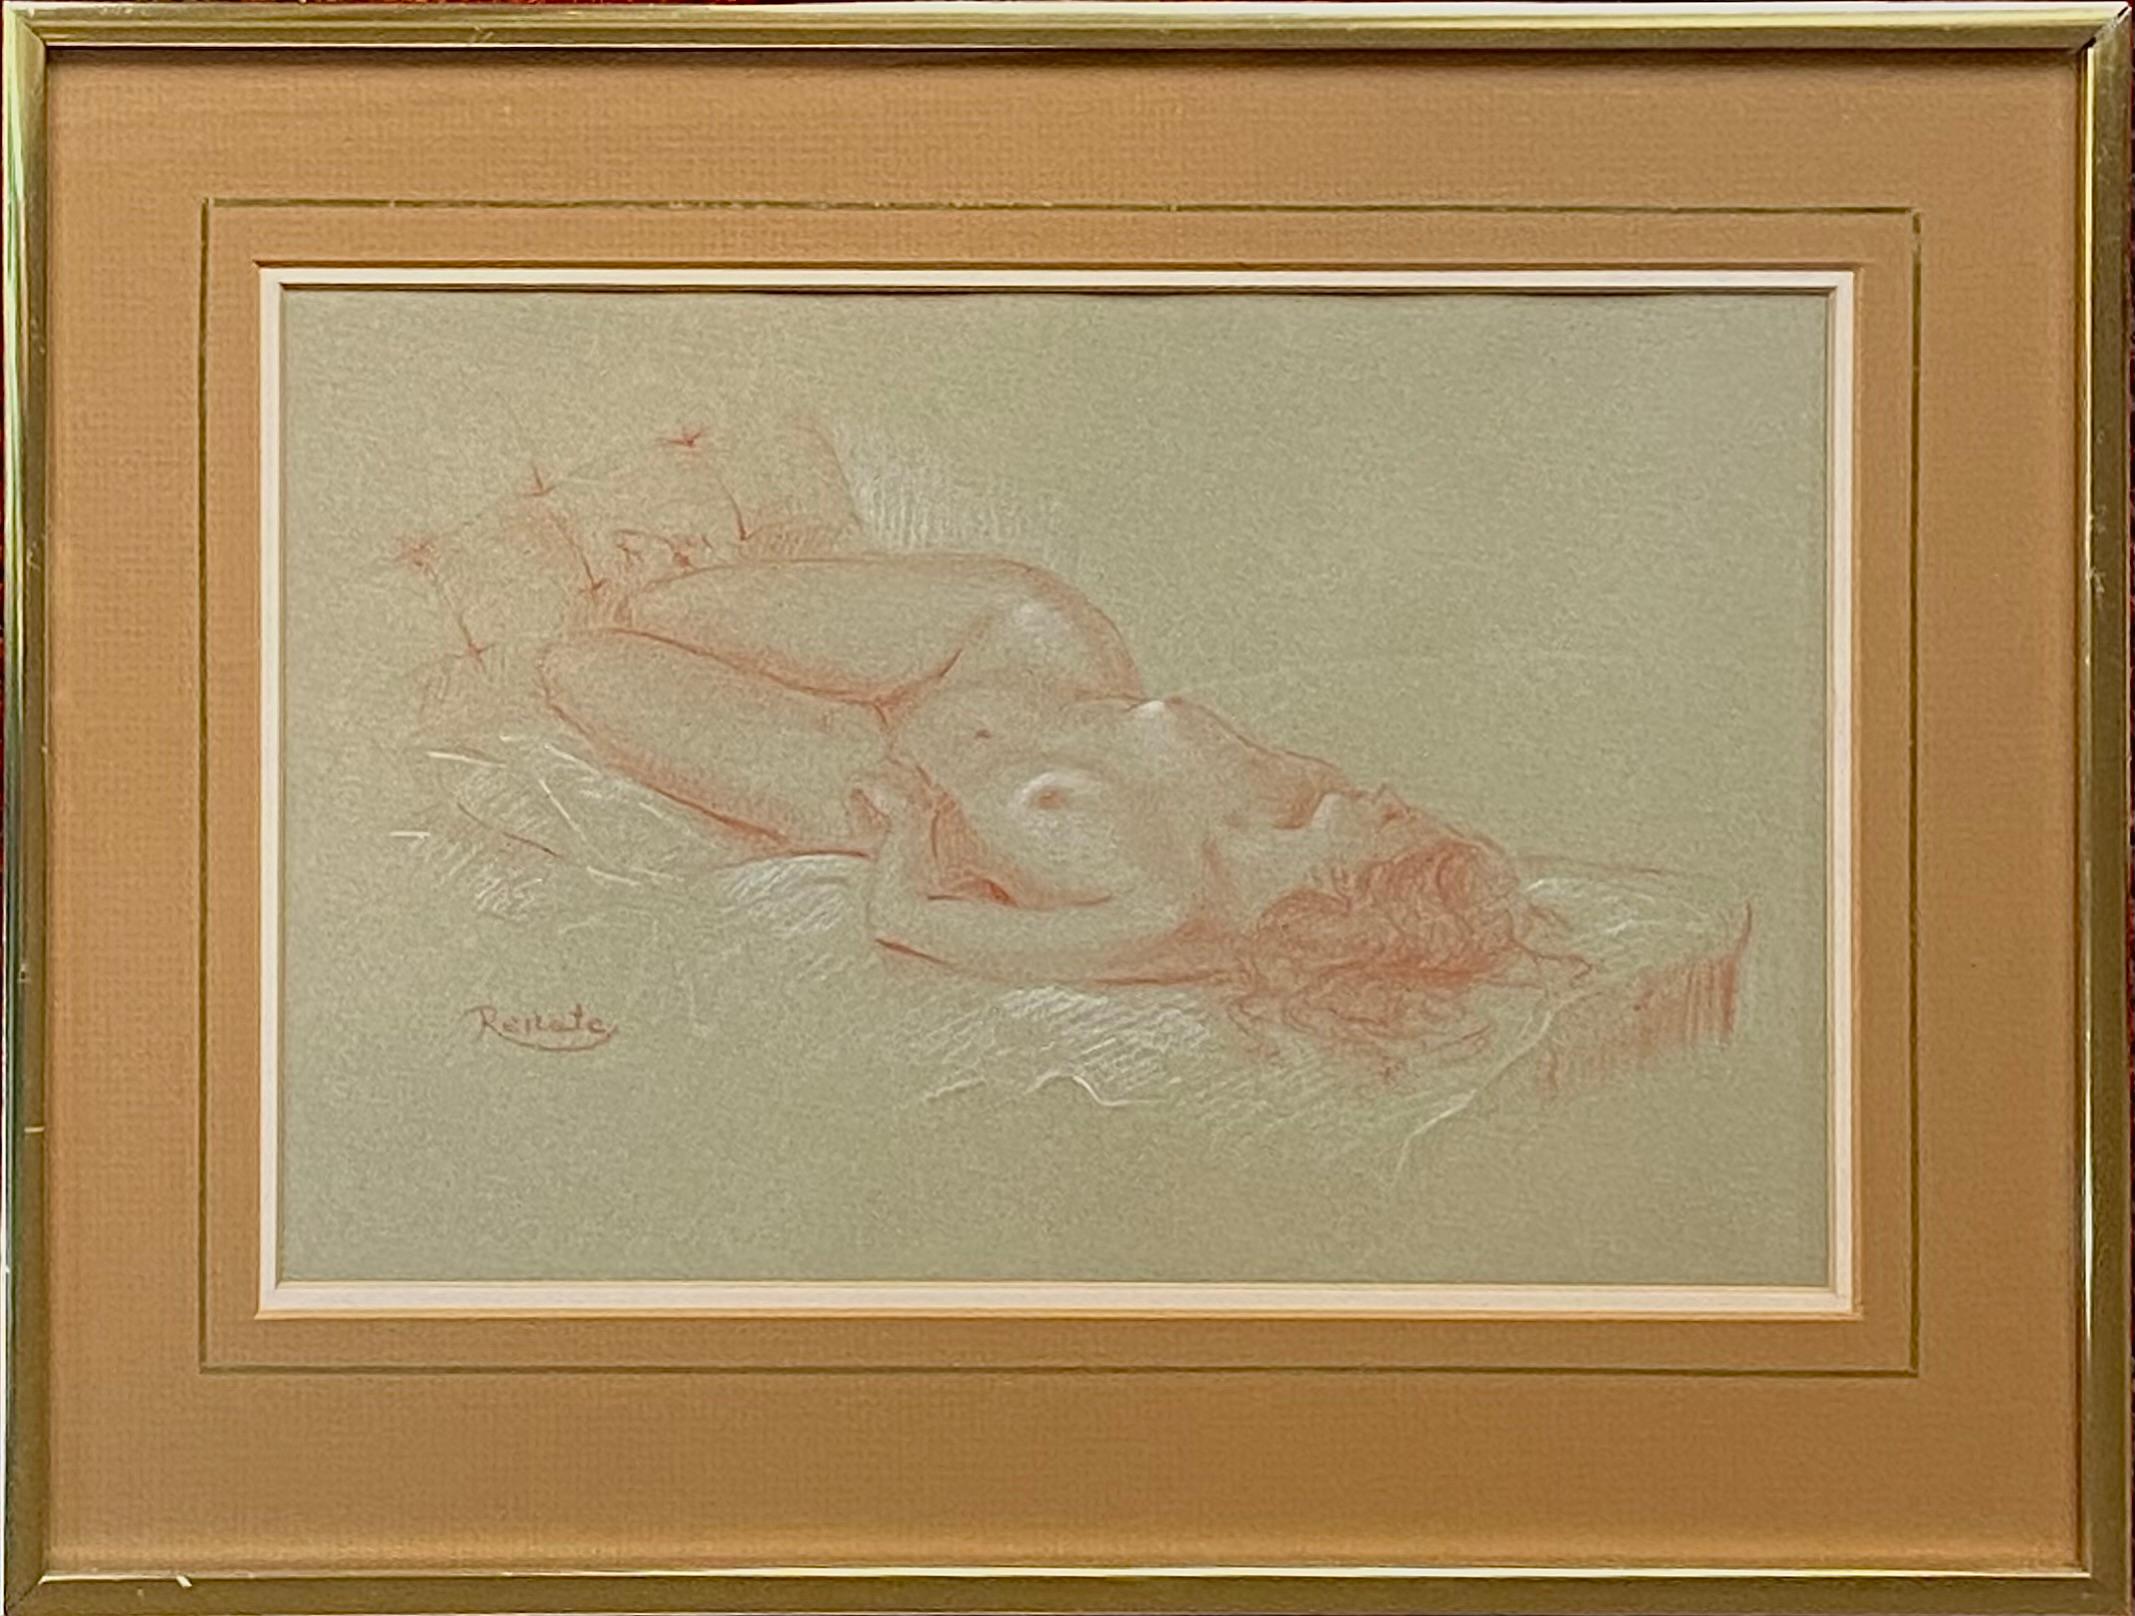 “Reclining Female Nude” - Academic Art by Renate Duncan